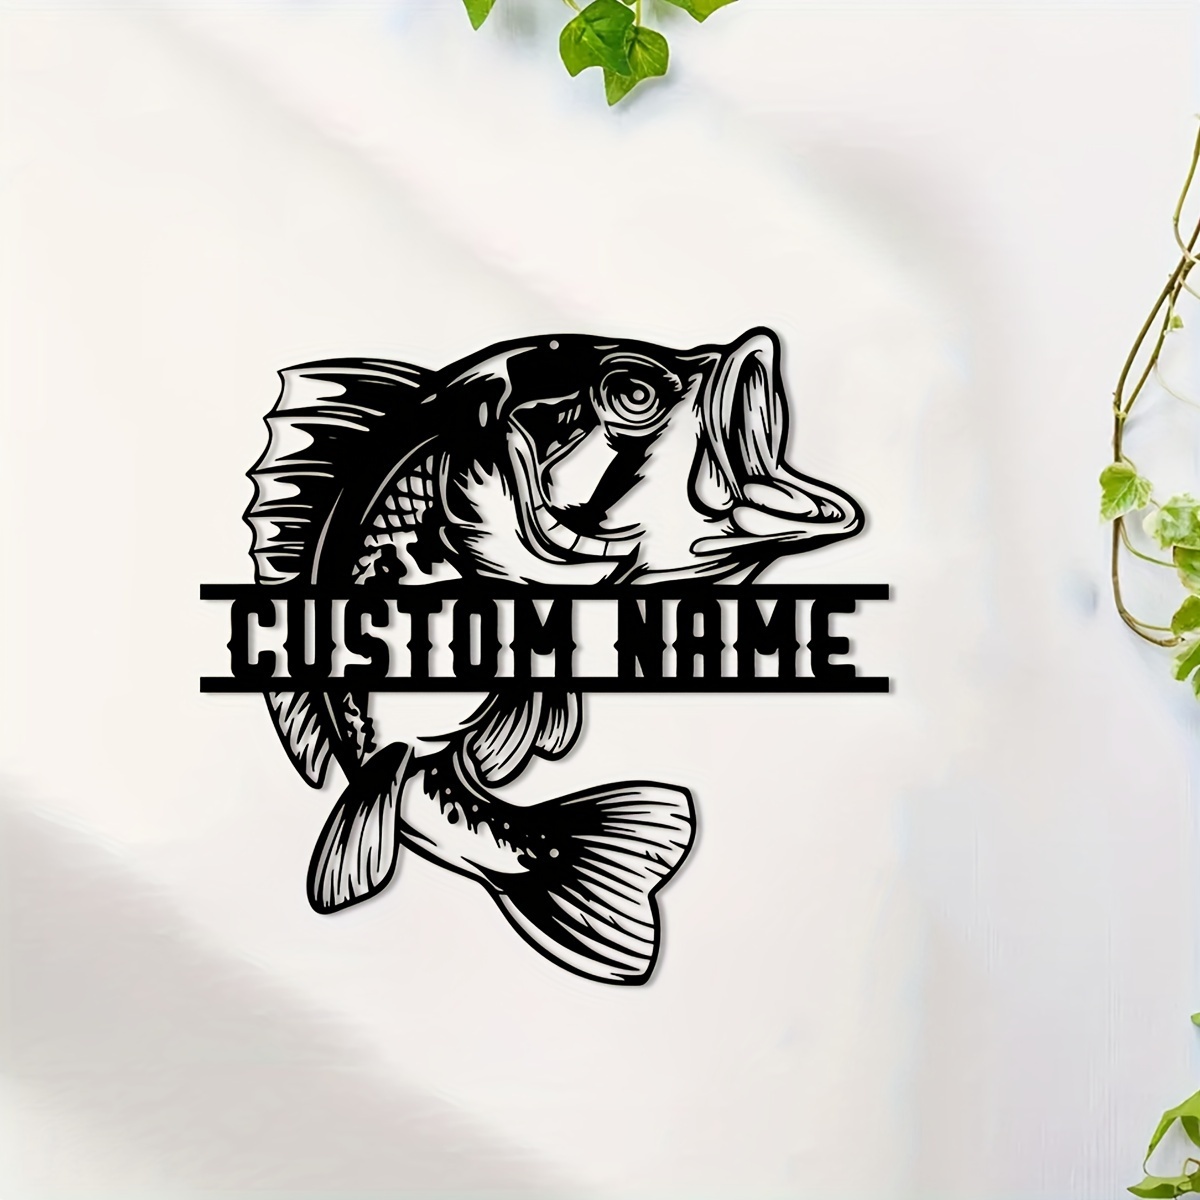 

1pc Custom Fish Wall Art, Personalised Fish Sign, Farmhouse Wall Fish Decoration, Metal Art For Residence Living Room Office Decoration, Custom Name Decor For Porch, Patio, Gifts